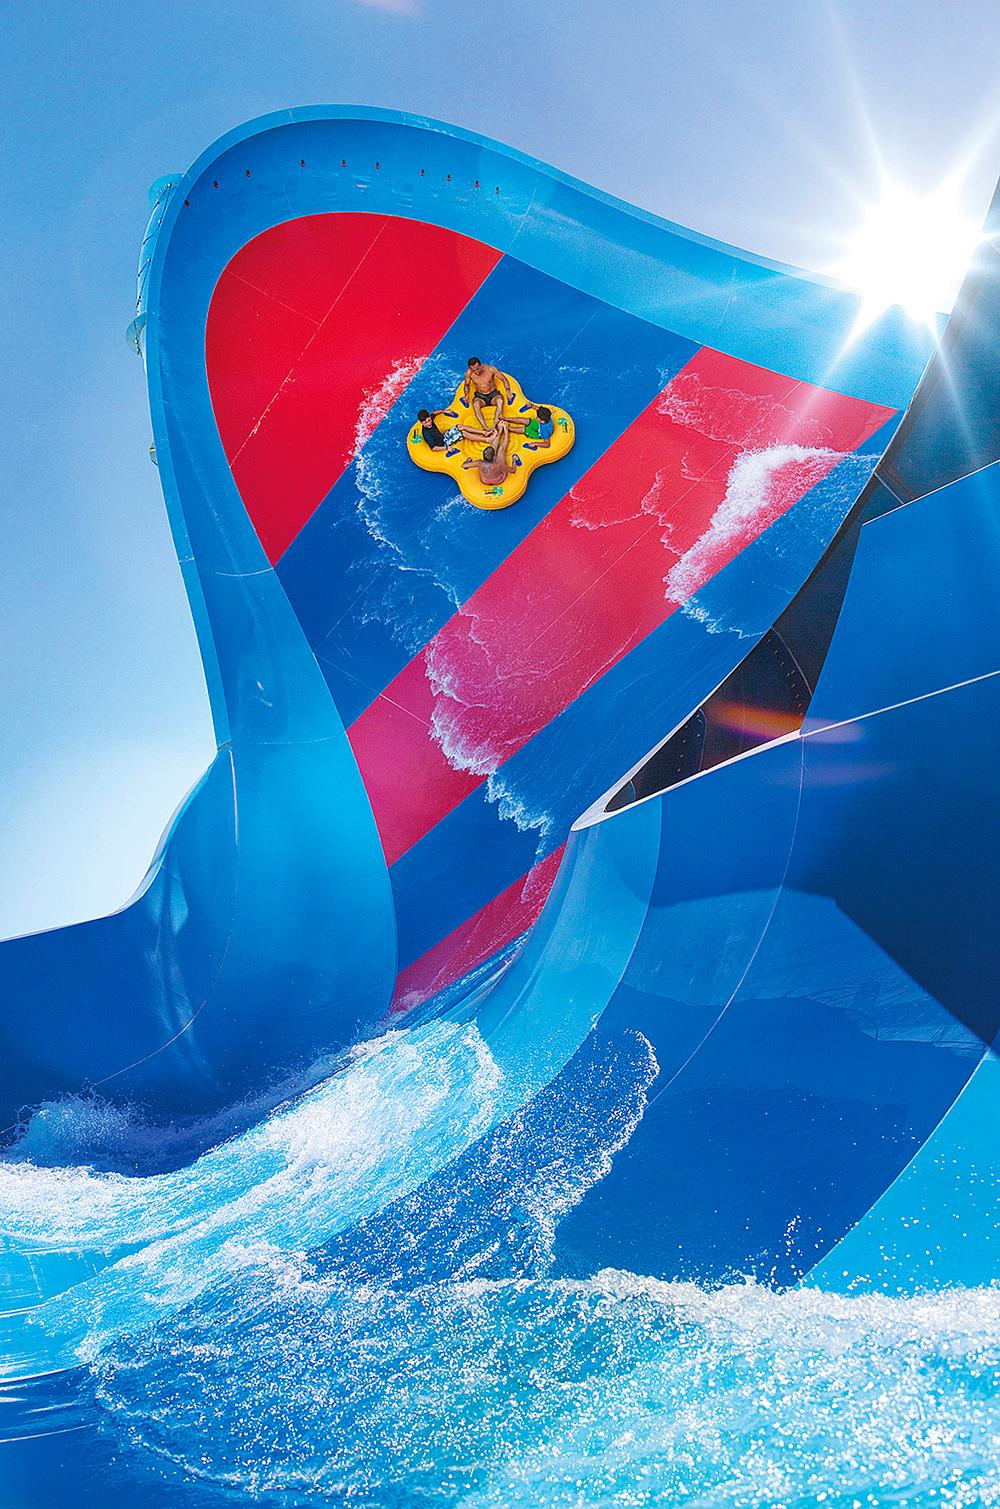 Wet 'n' Wild is going back to Las Vegas with a $50 million